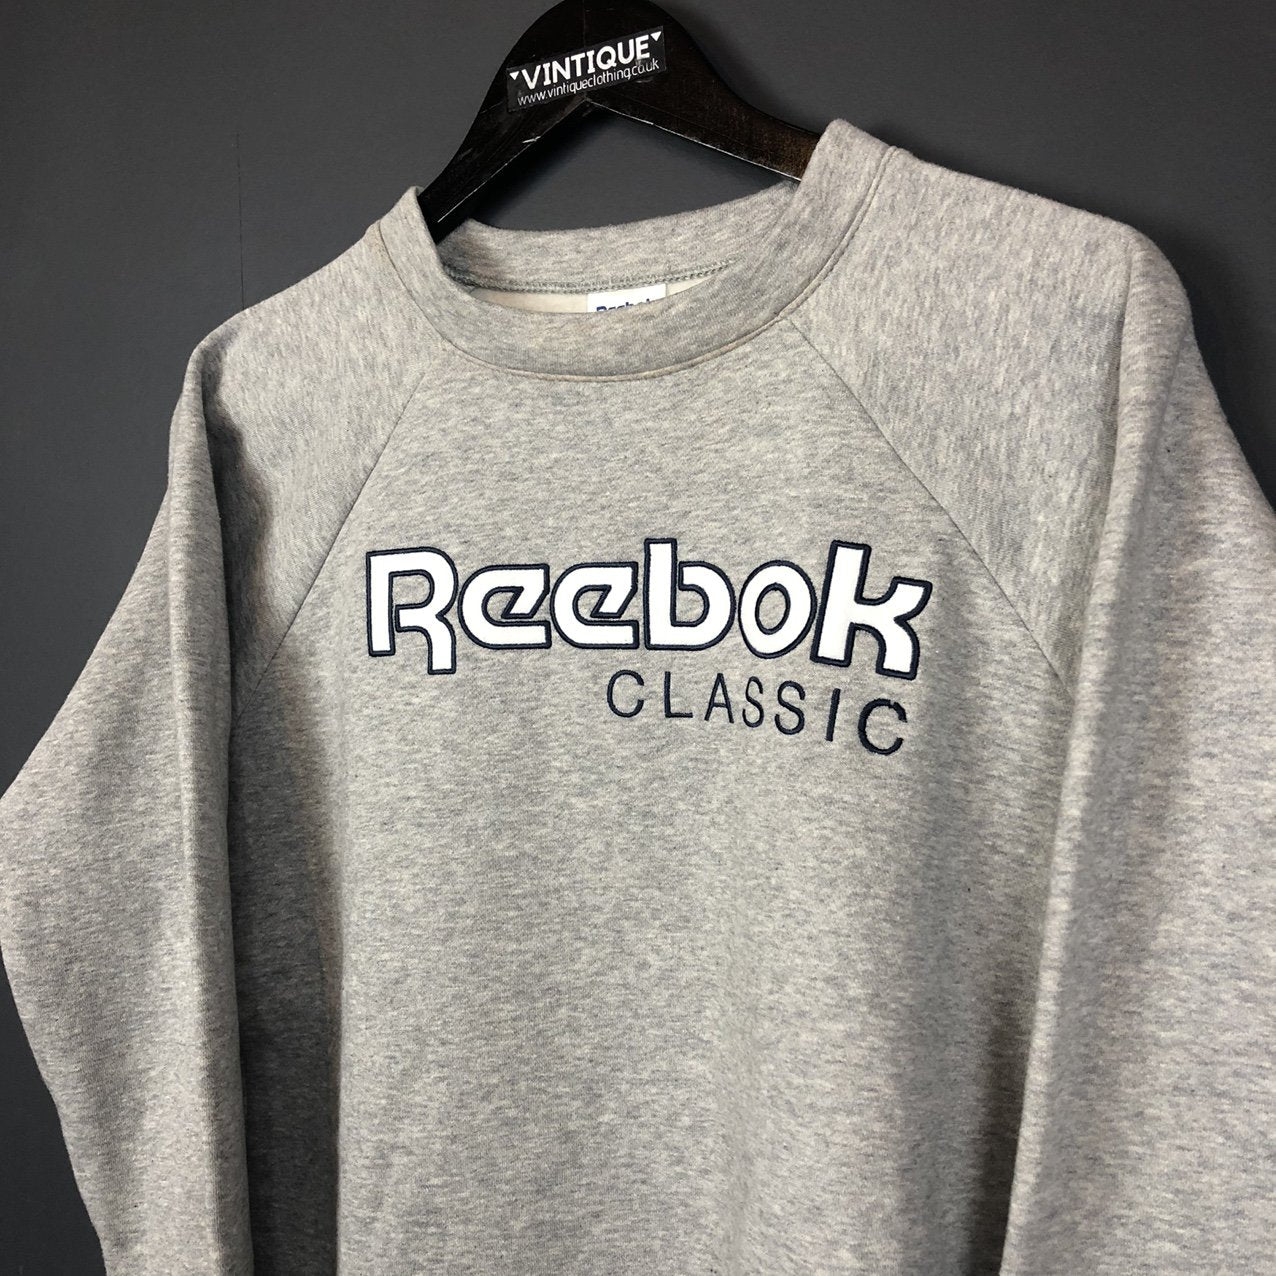 Reebok Spellout Sweatshirt with Embroidered Spellout - Small - Vintique Clothing